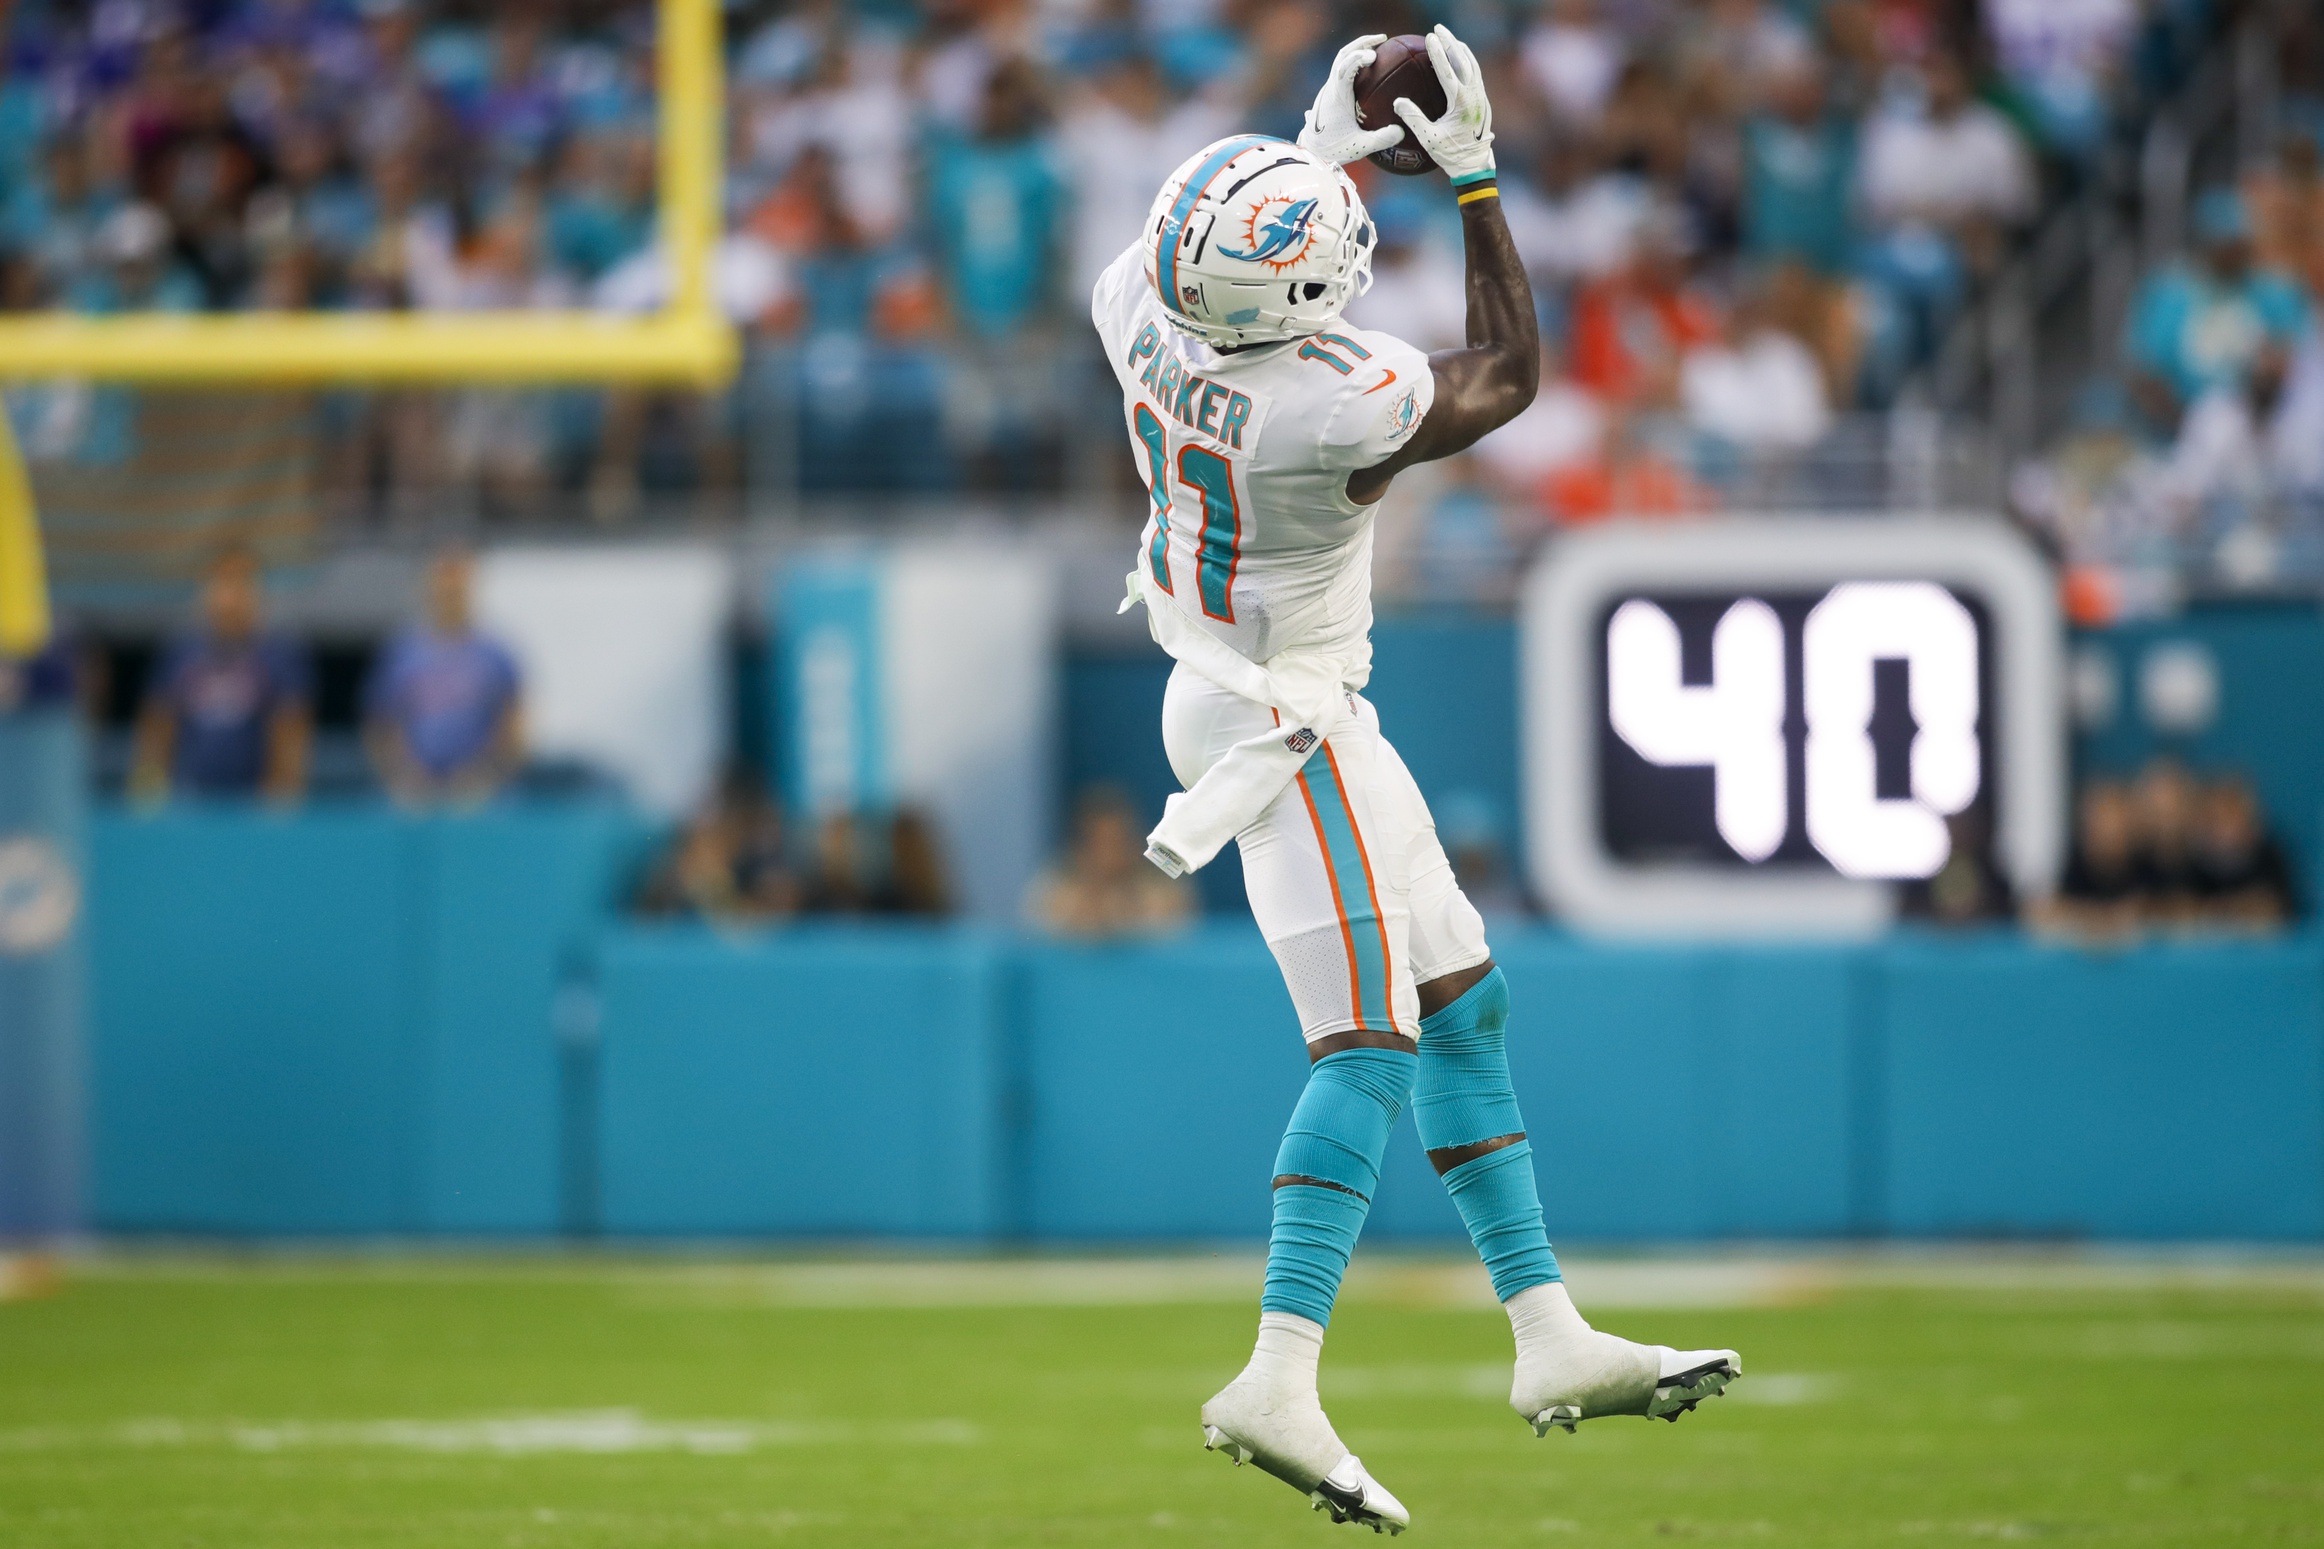 NFL Week 4 picks, predictions for Colts vs. Dolphins